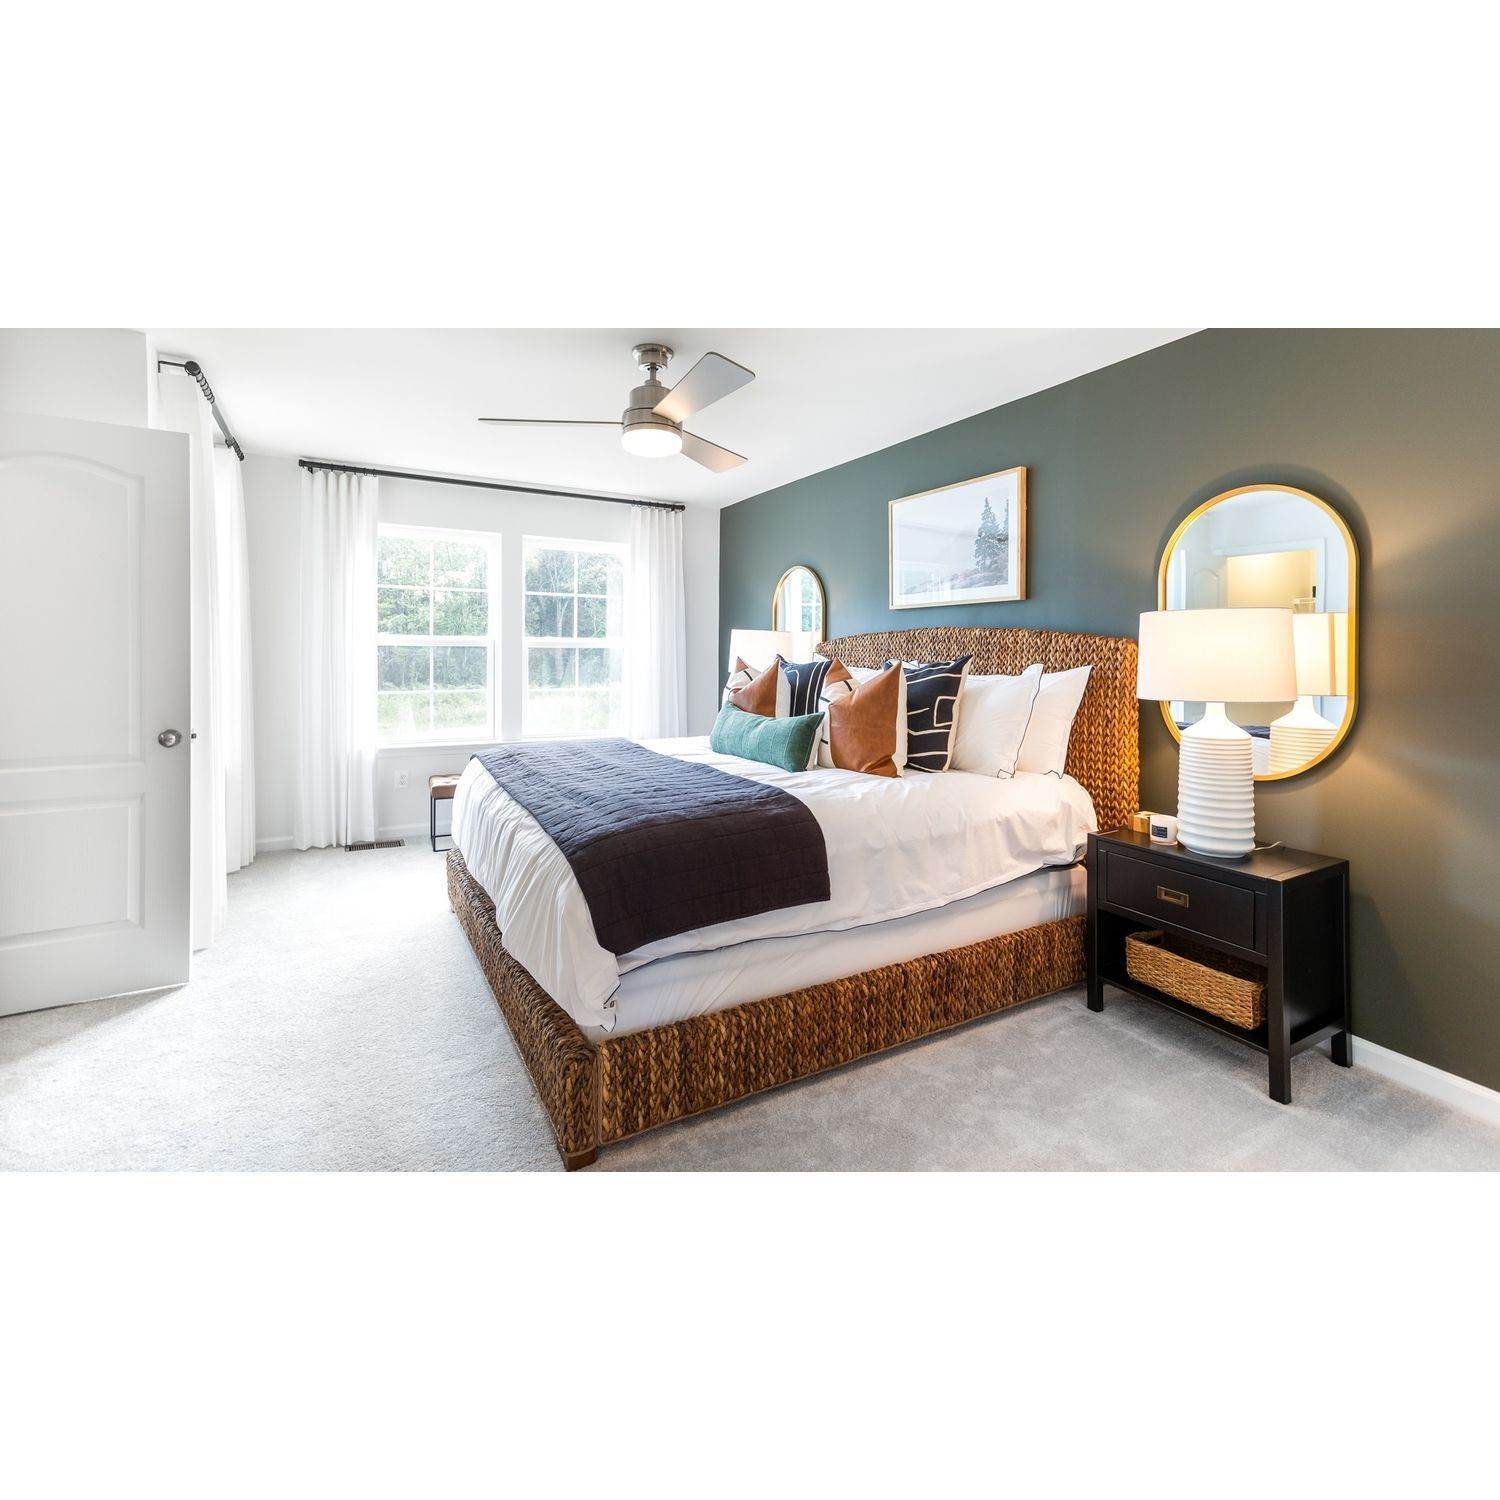 11. Whispering Pines Townhomes bâtiment à 16 Loblolly Drive, Bunker Hill, WV 25413